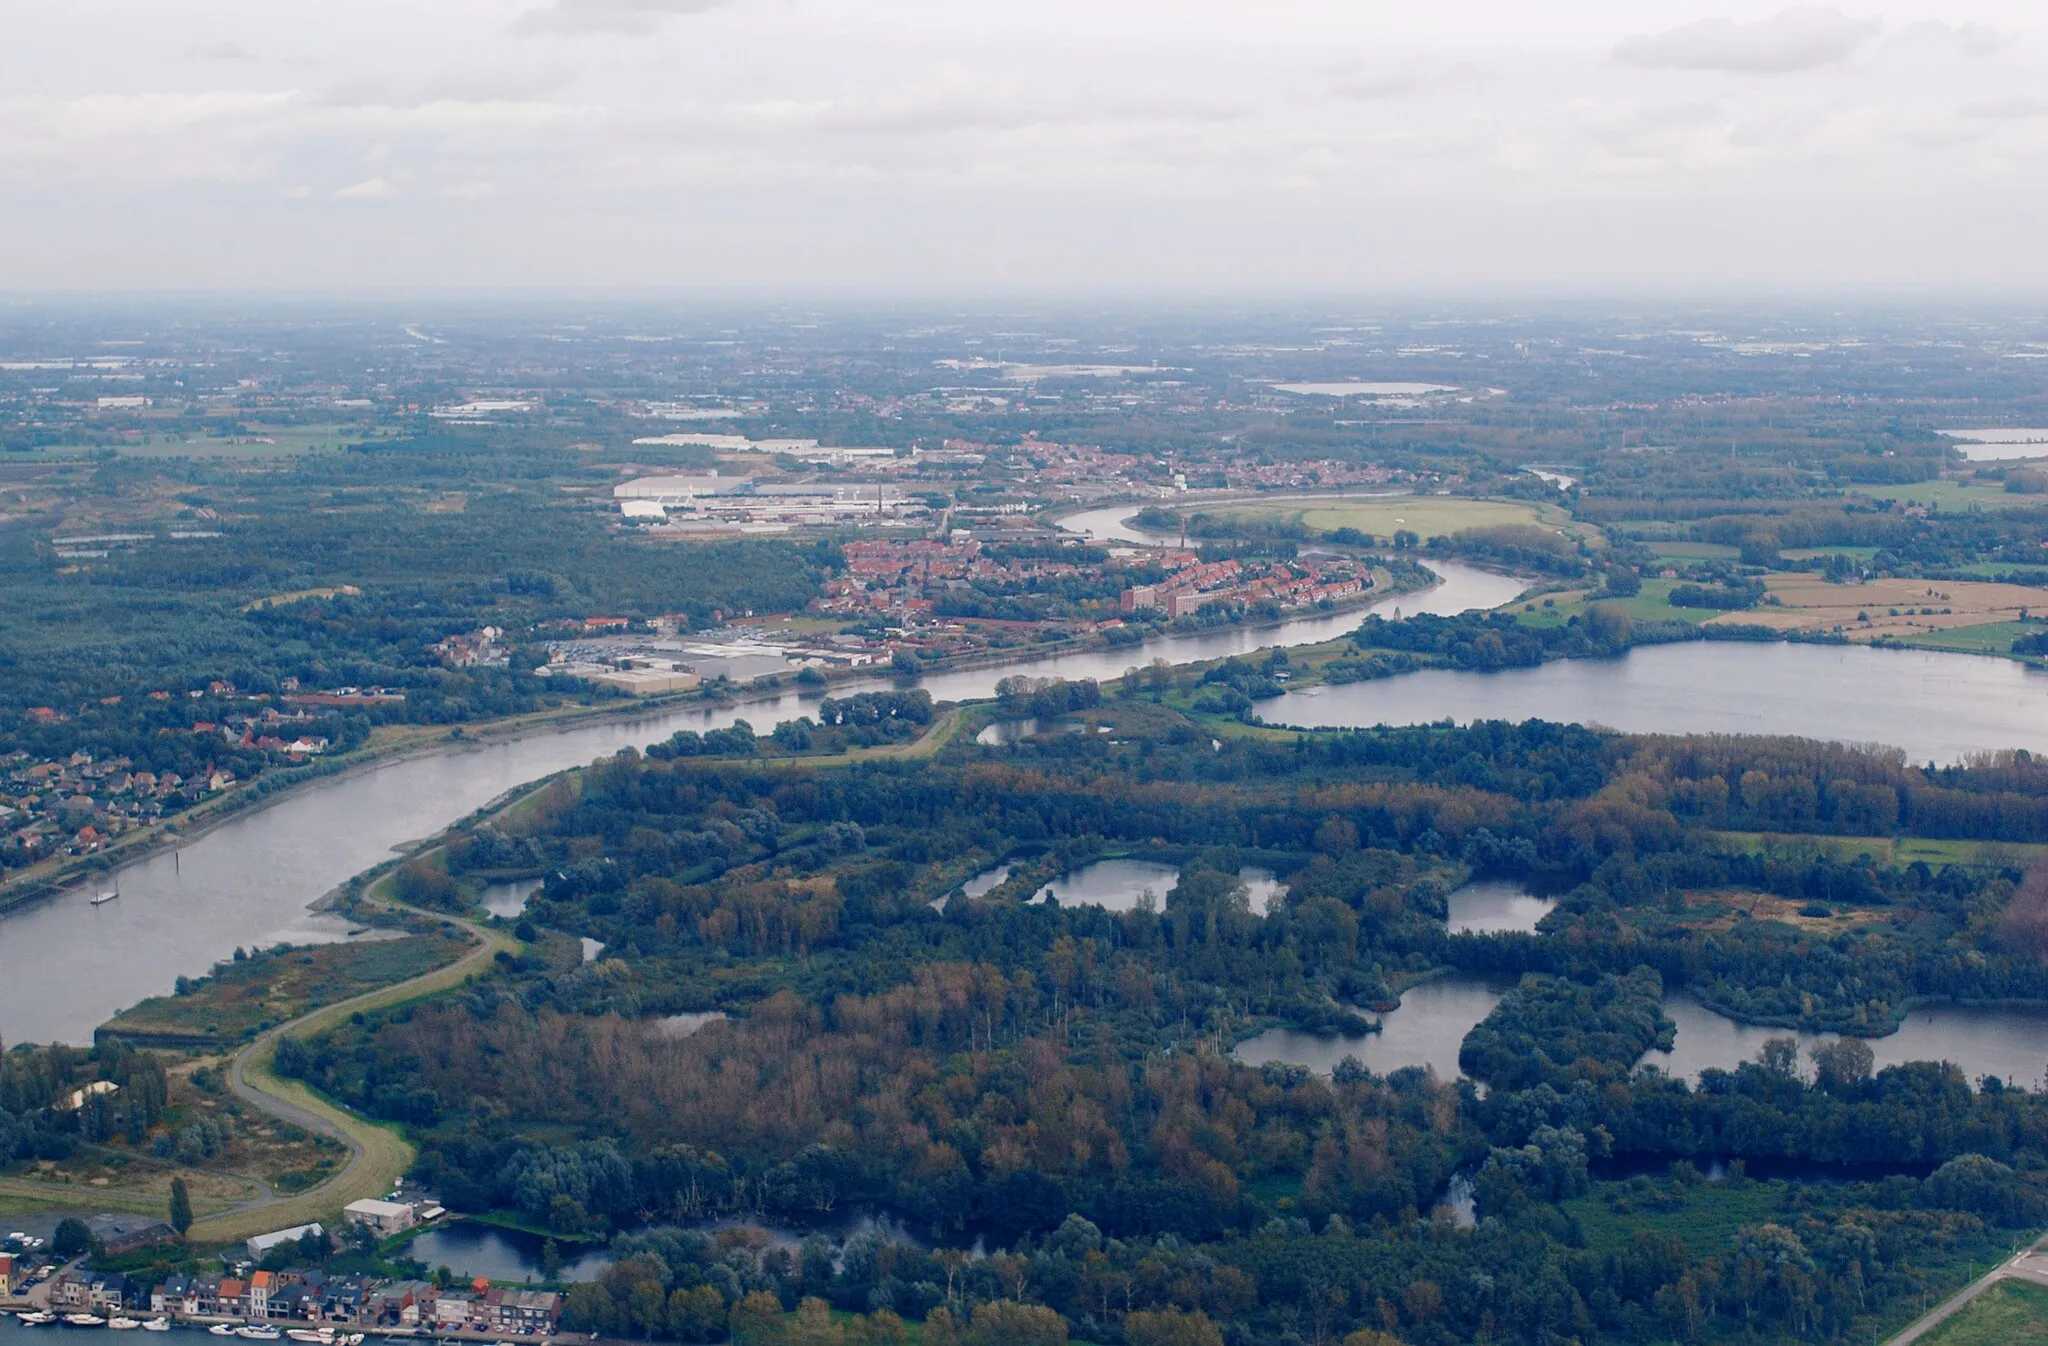 Photo showing: Aerial photograph of nearly the entire course of the short river Rupel (Belgium). In the centre of the picture is the village of Terhagen, municipality Rumst. Behind it lies the centre village of Rumst proper. Across the river lies the less densely-populated Heindonk, part of the municipality of Willebroek. In the lower left corner part of the Brussels-Willebroek canal is visible. Nikon D60 f=35mm f/7.1 at 1/200s ISO 200. Processed using GIMP 2.6.11.